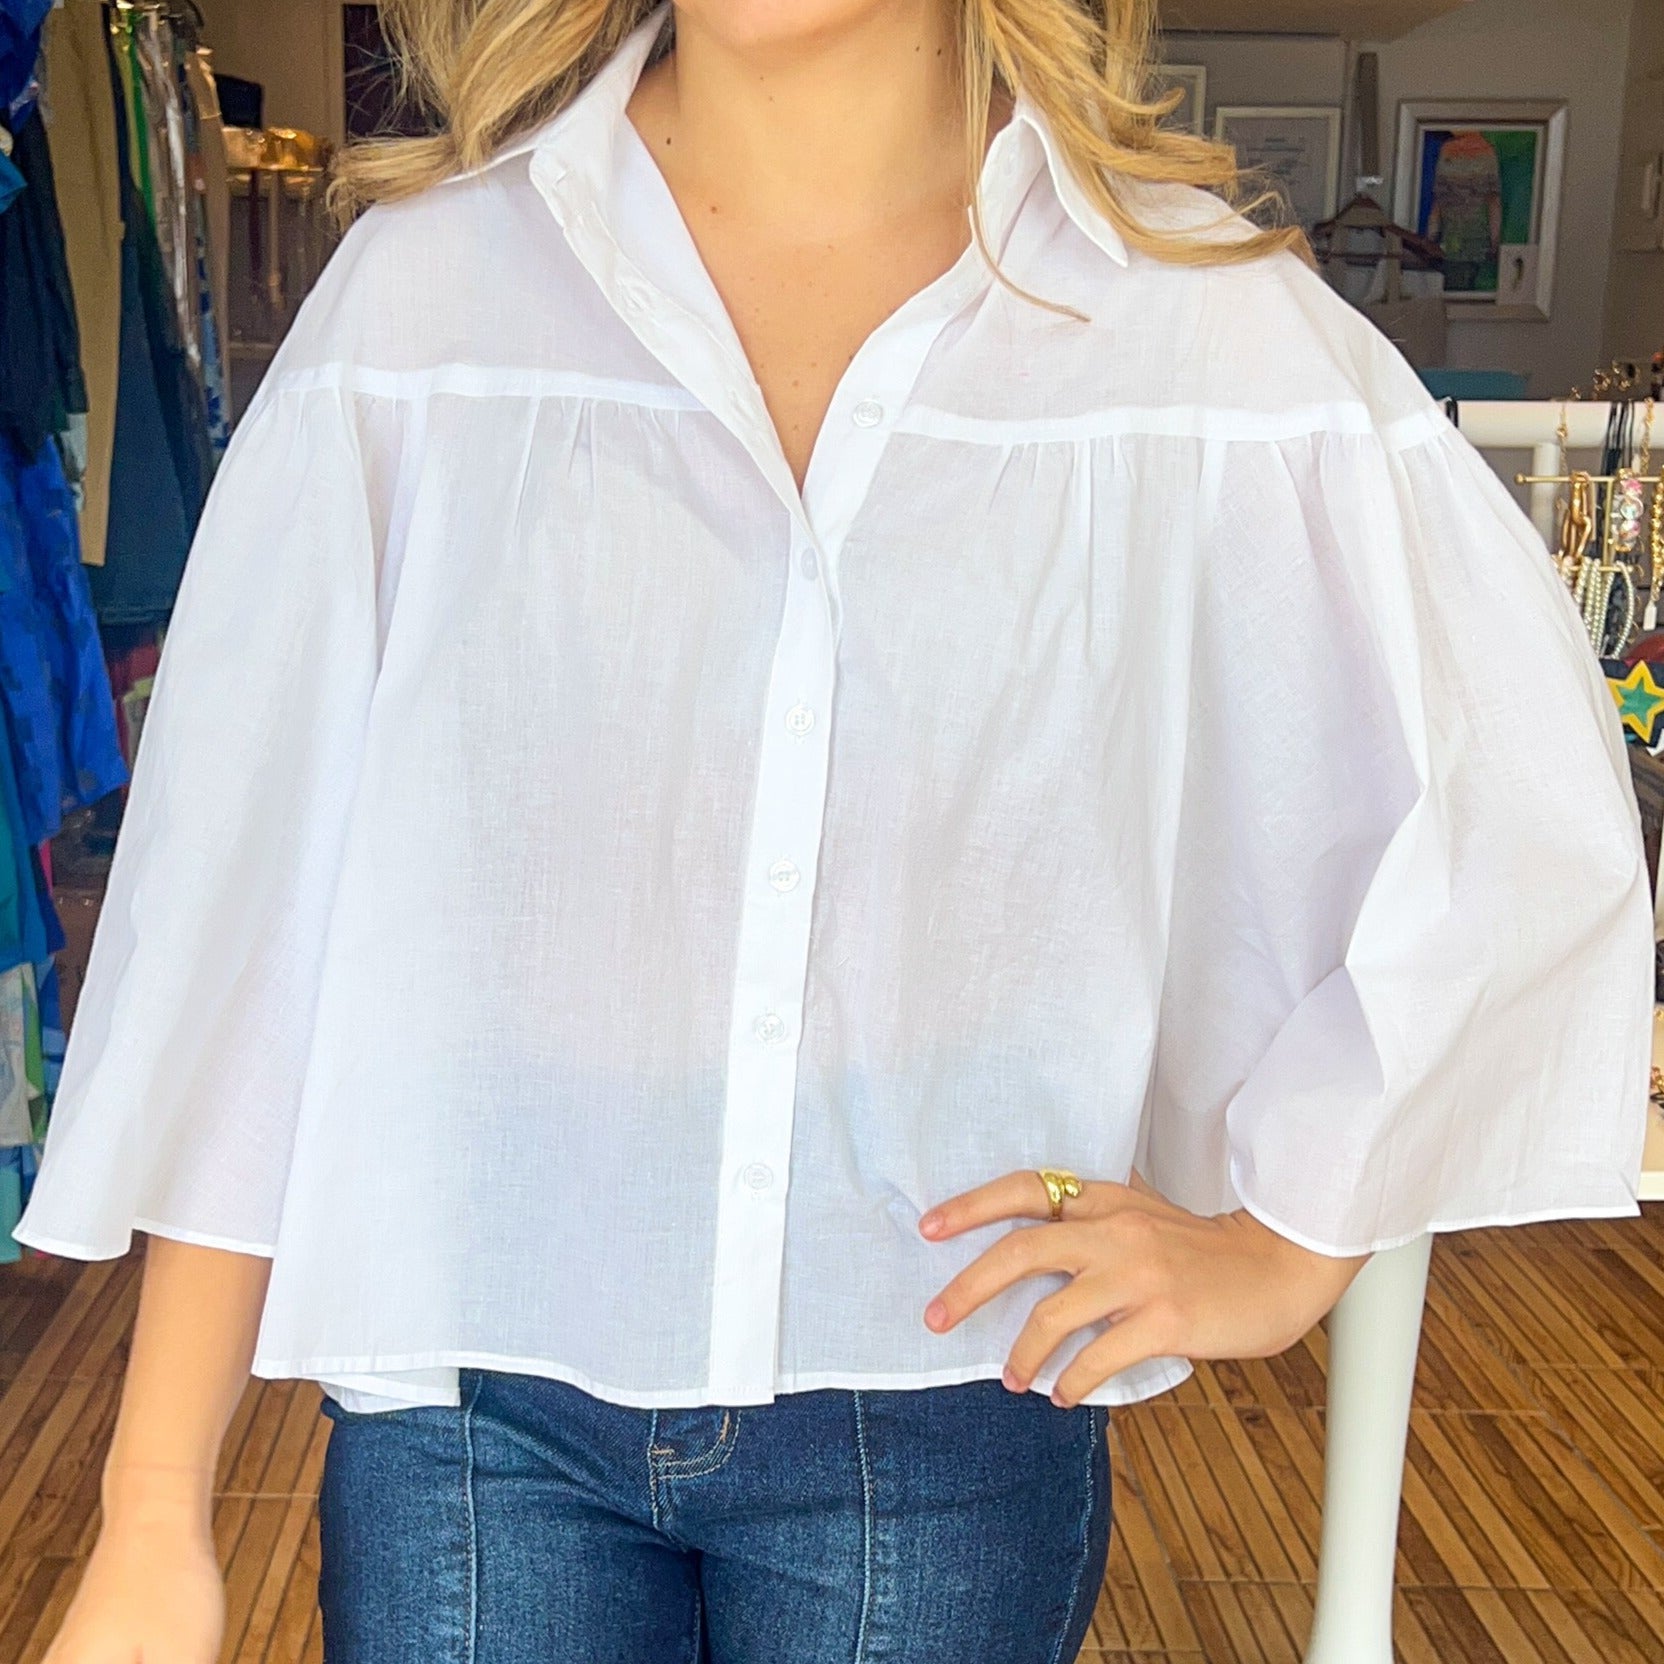 Loose fitting bell sleeve button down blouse. Available in pink and white.